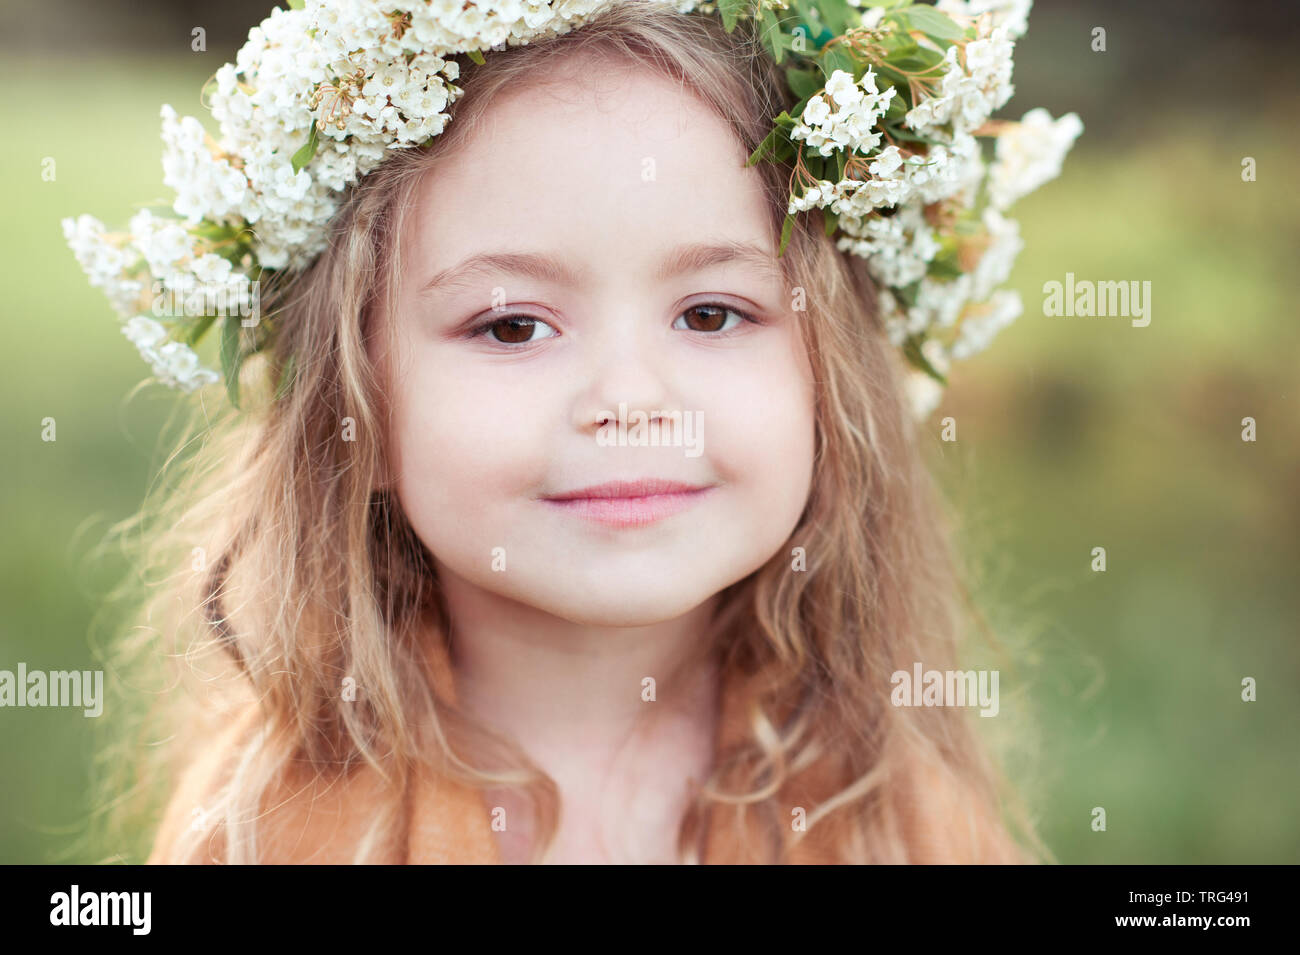 Cute kid girl 4-5 year old with flowers in hairstyle outdoors. Looking at  camera. Childhood Stock Photo - Alamy